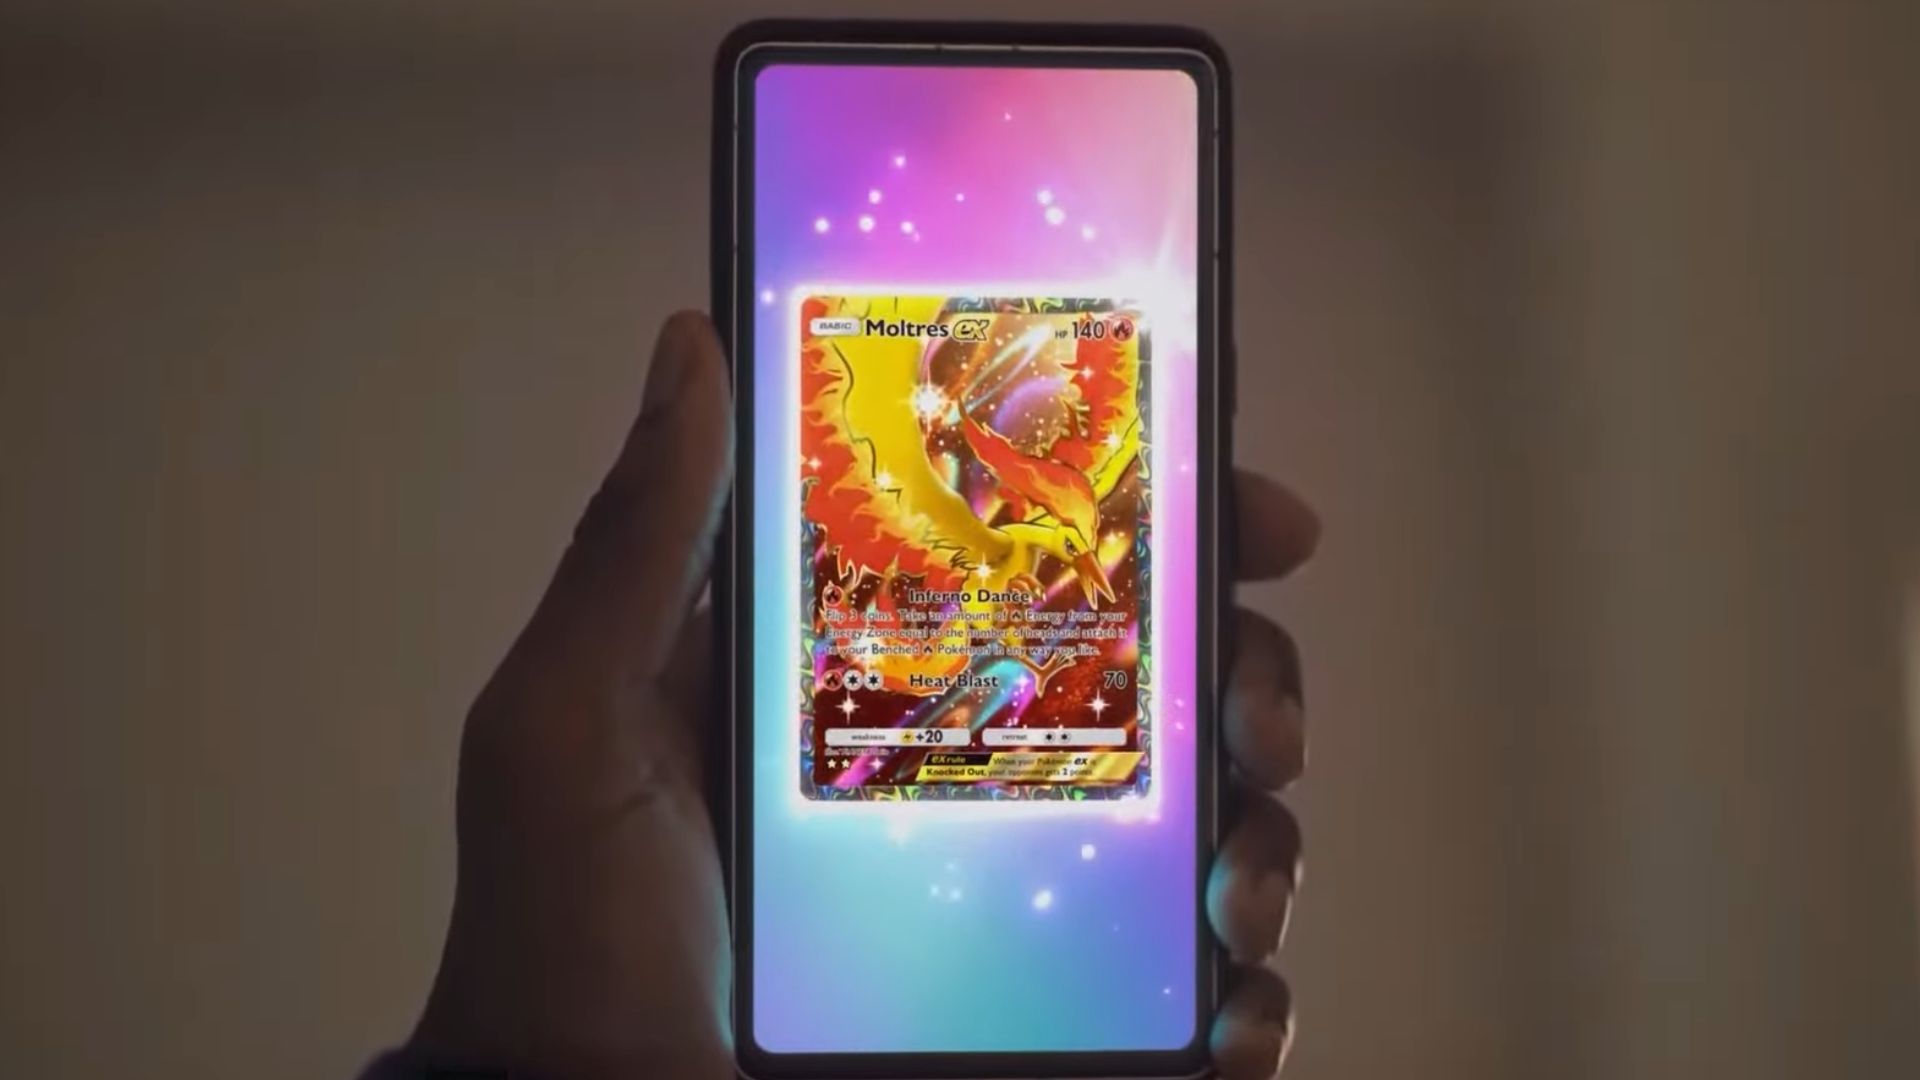 Player opening Shiny Moltres in Pokemon Trading Card Game Pocket